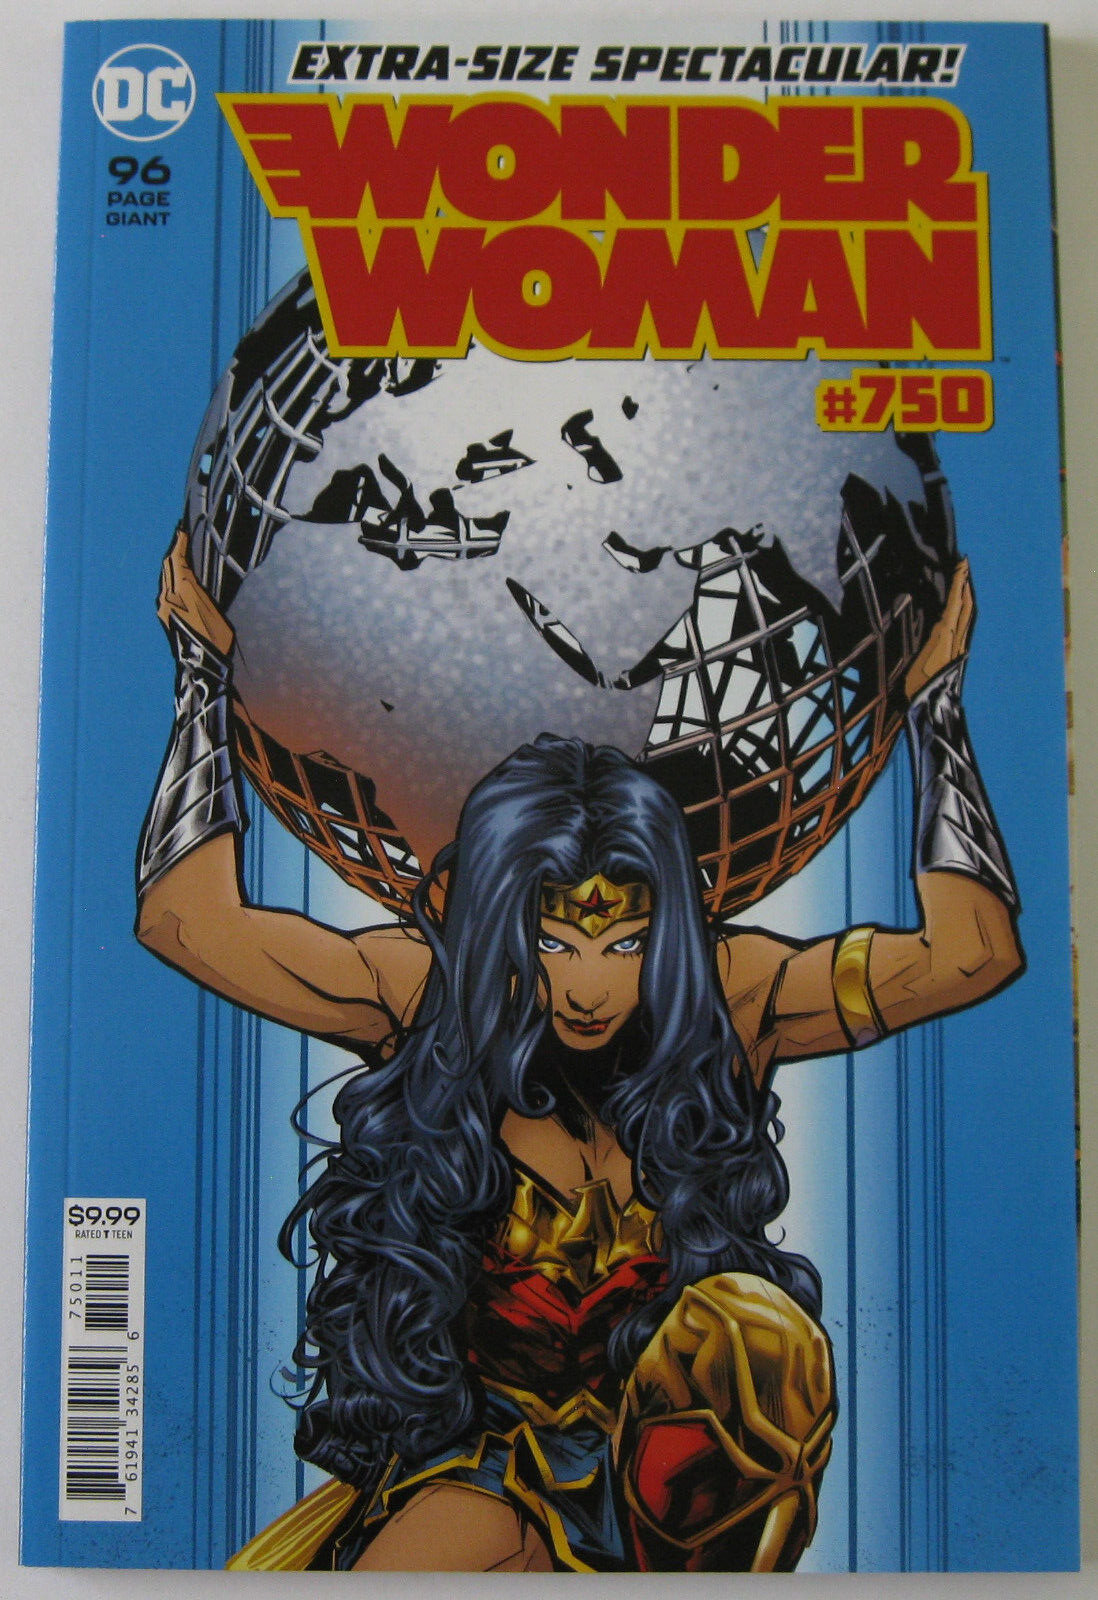 Wonder Woman #750 (Mar 2020, DC), NM-MT condition (9.8), copy C, 96 page issue